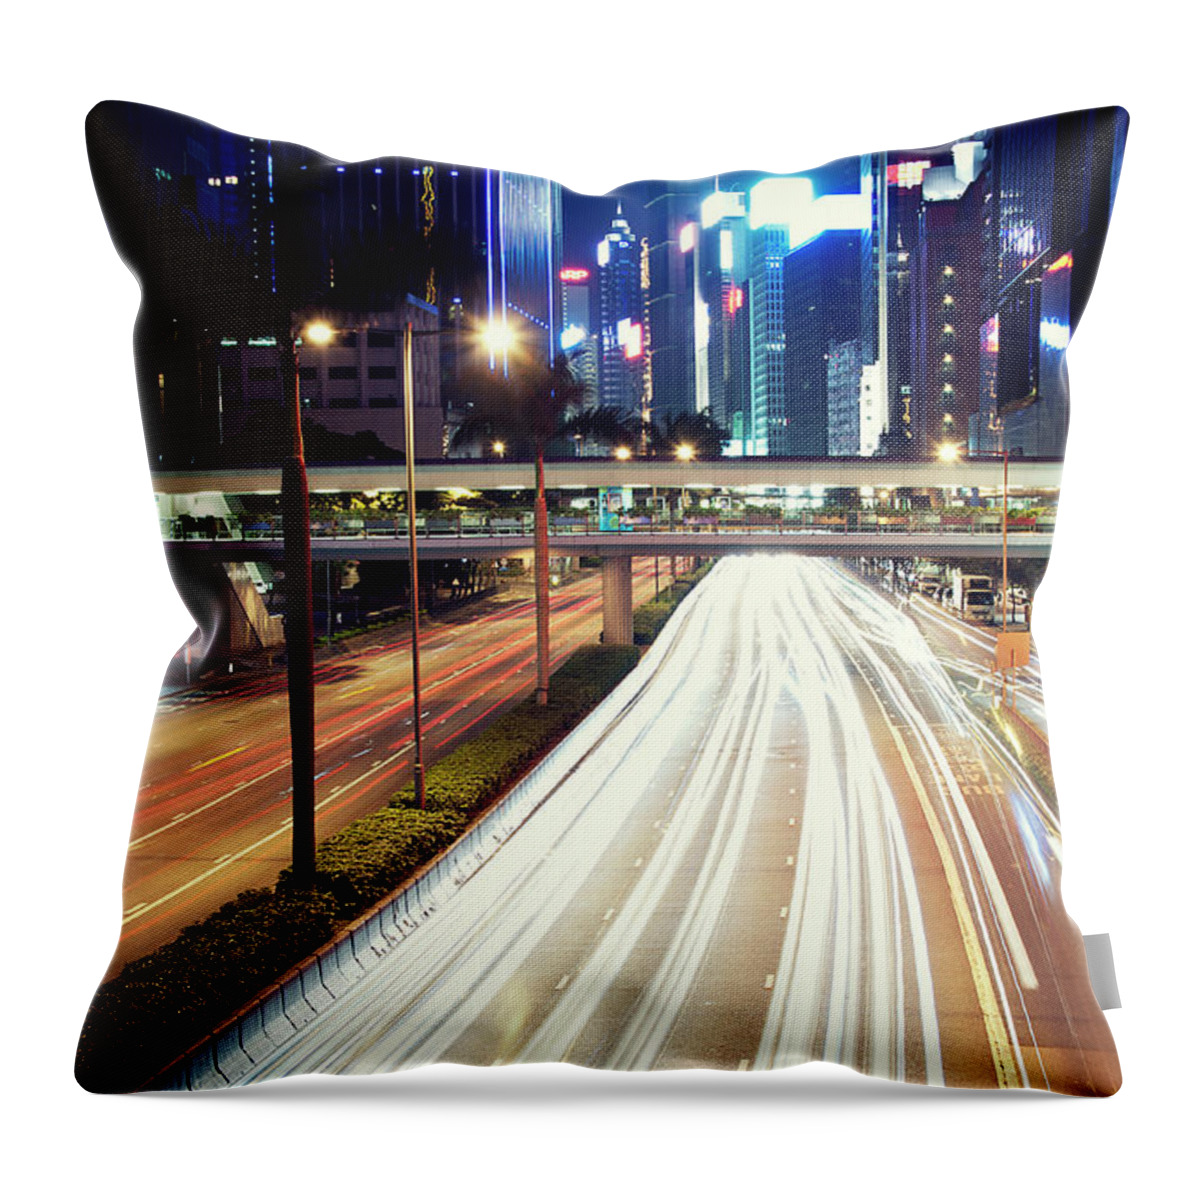 Built Structure Throw Pillow featuring the photograph Light Trails At Traffic On Street At by Thank You For Choosing My Work.